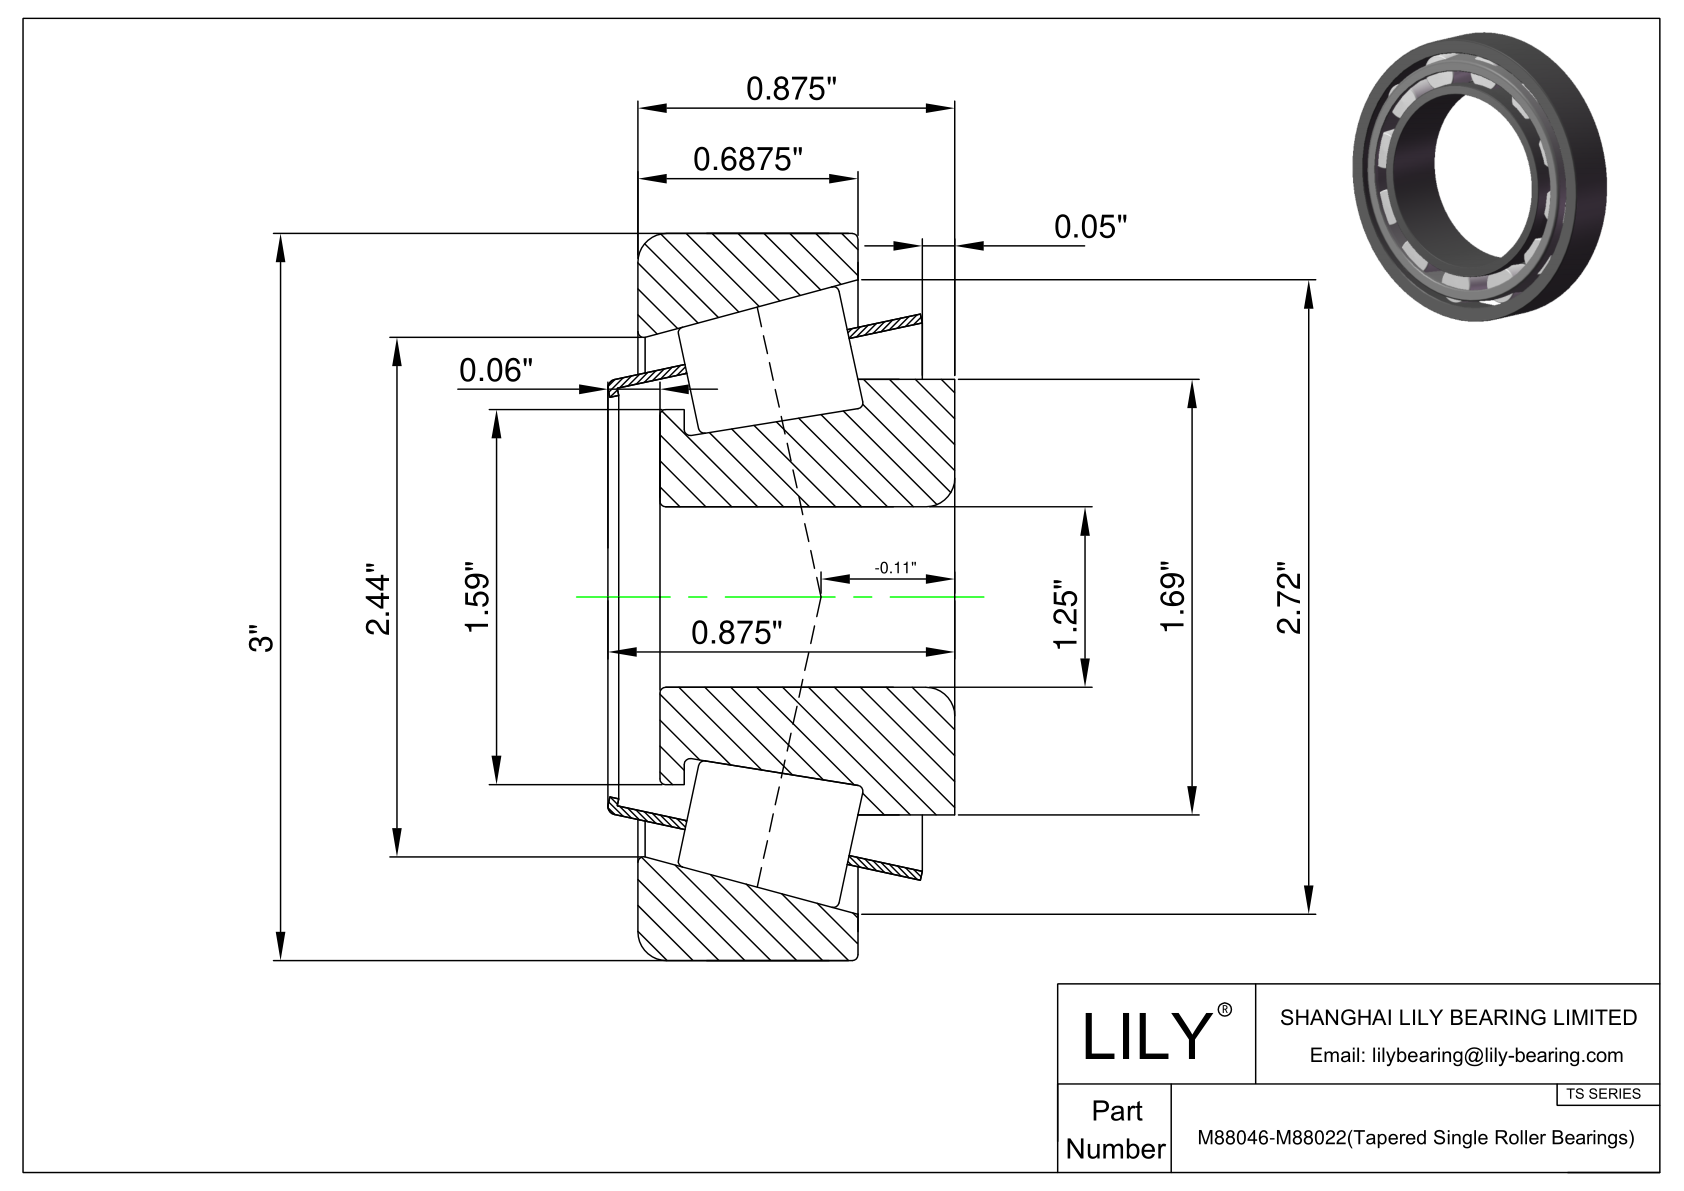 M88046-M88022 TS (Tapered Single Roller Bearings) (Imperial) cad drawing